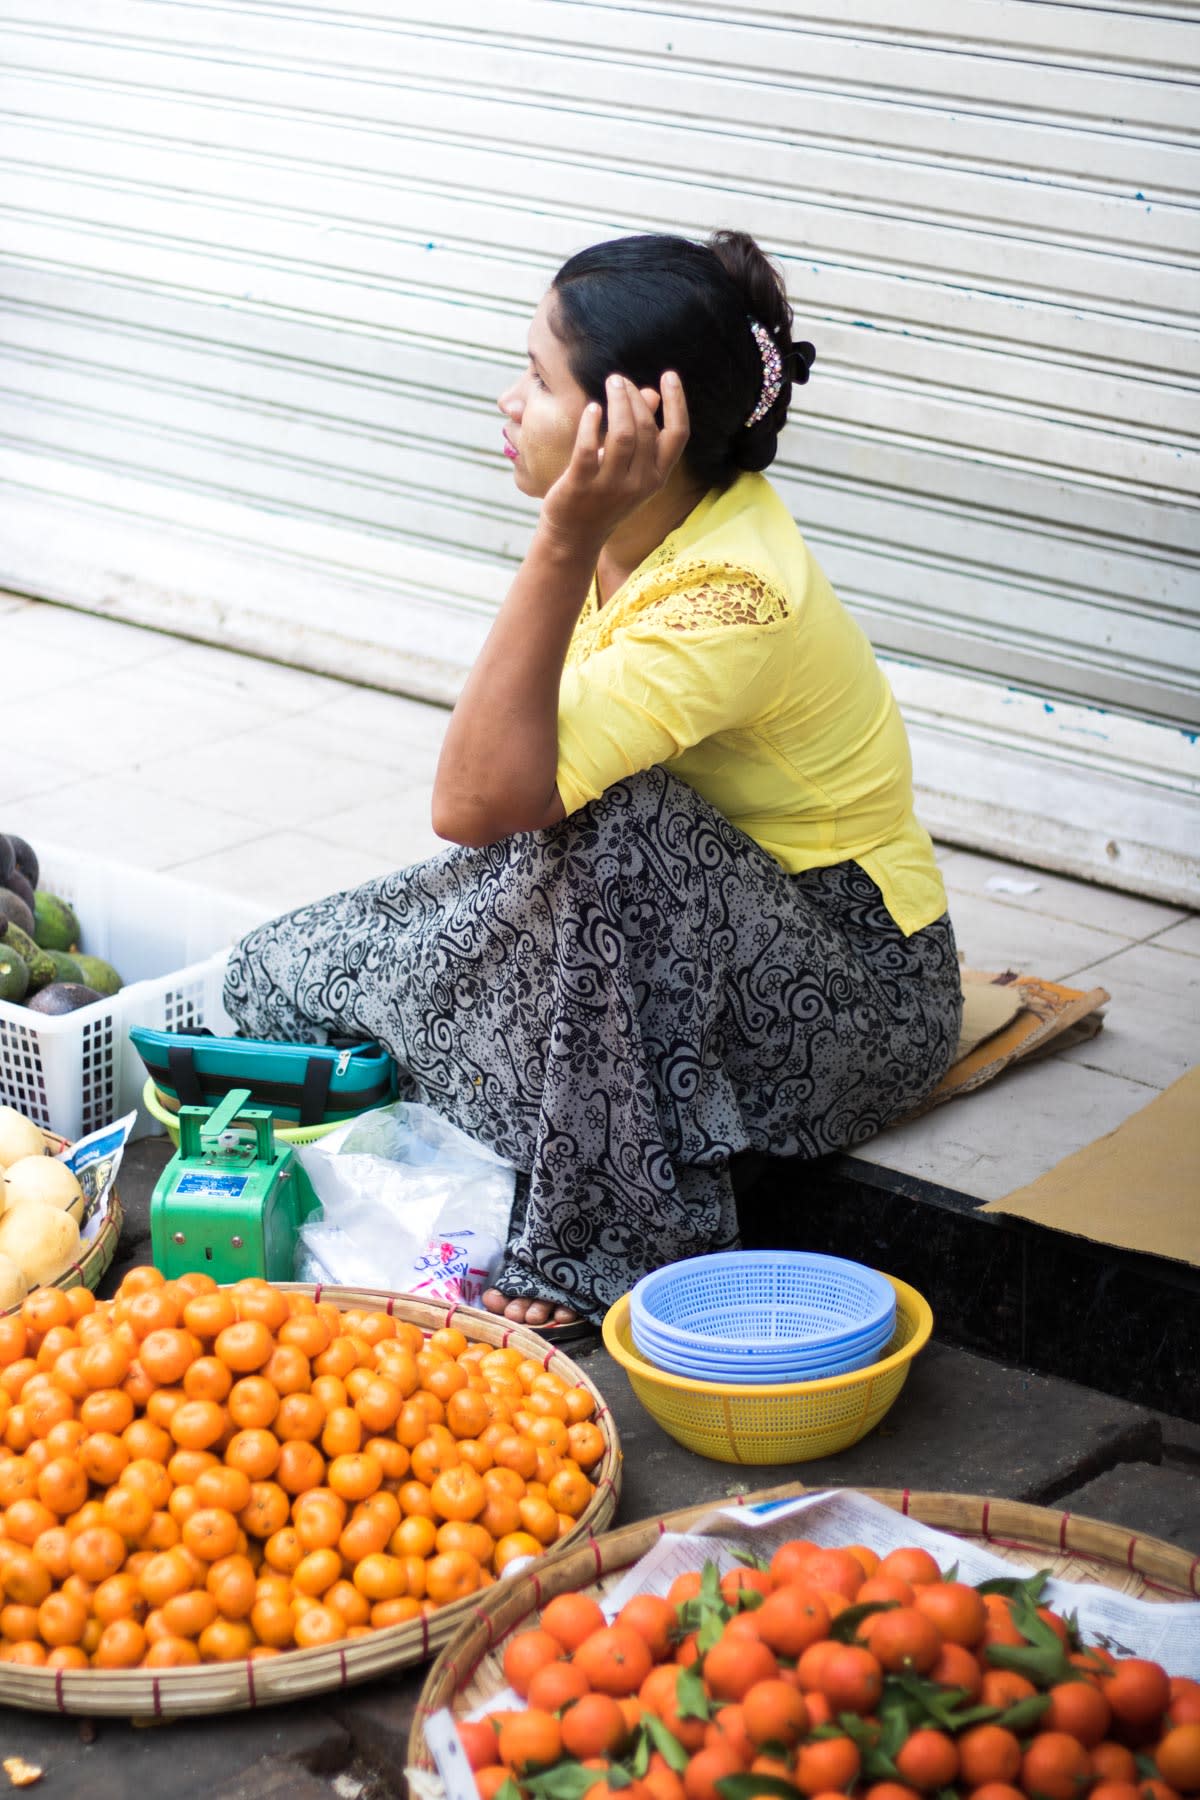 A fruits vendor sitting on curbside with tangerines on display